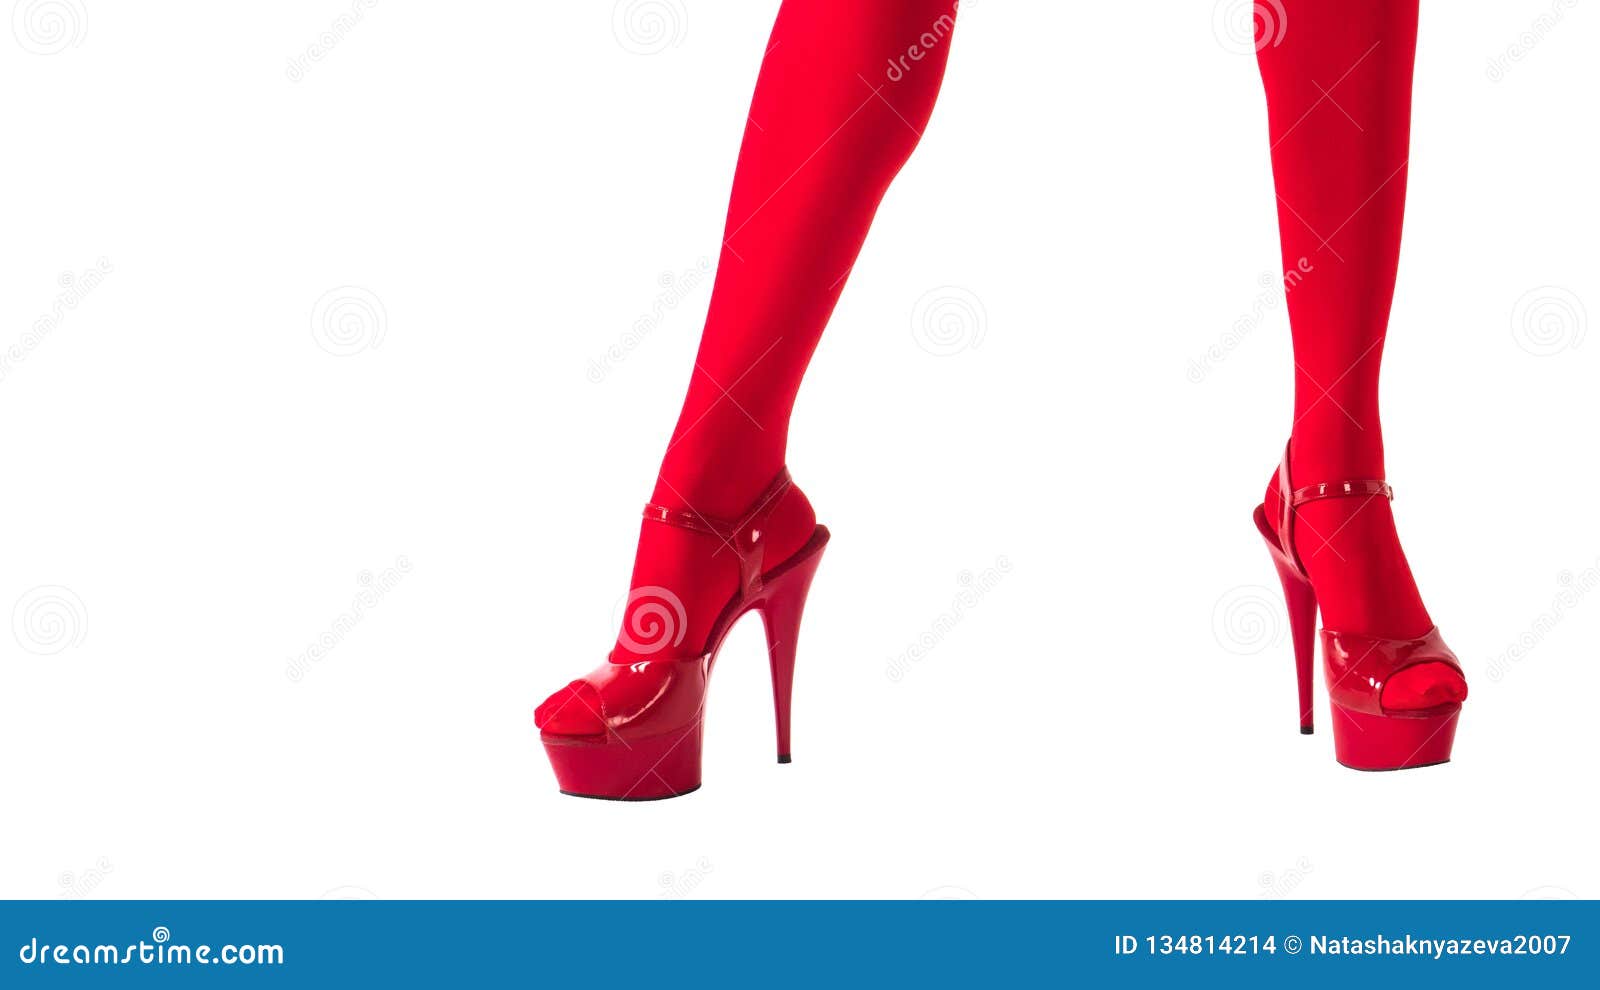 Female Legs In Fetish Red Stockings And Red High Heels Isolated